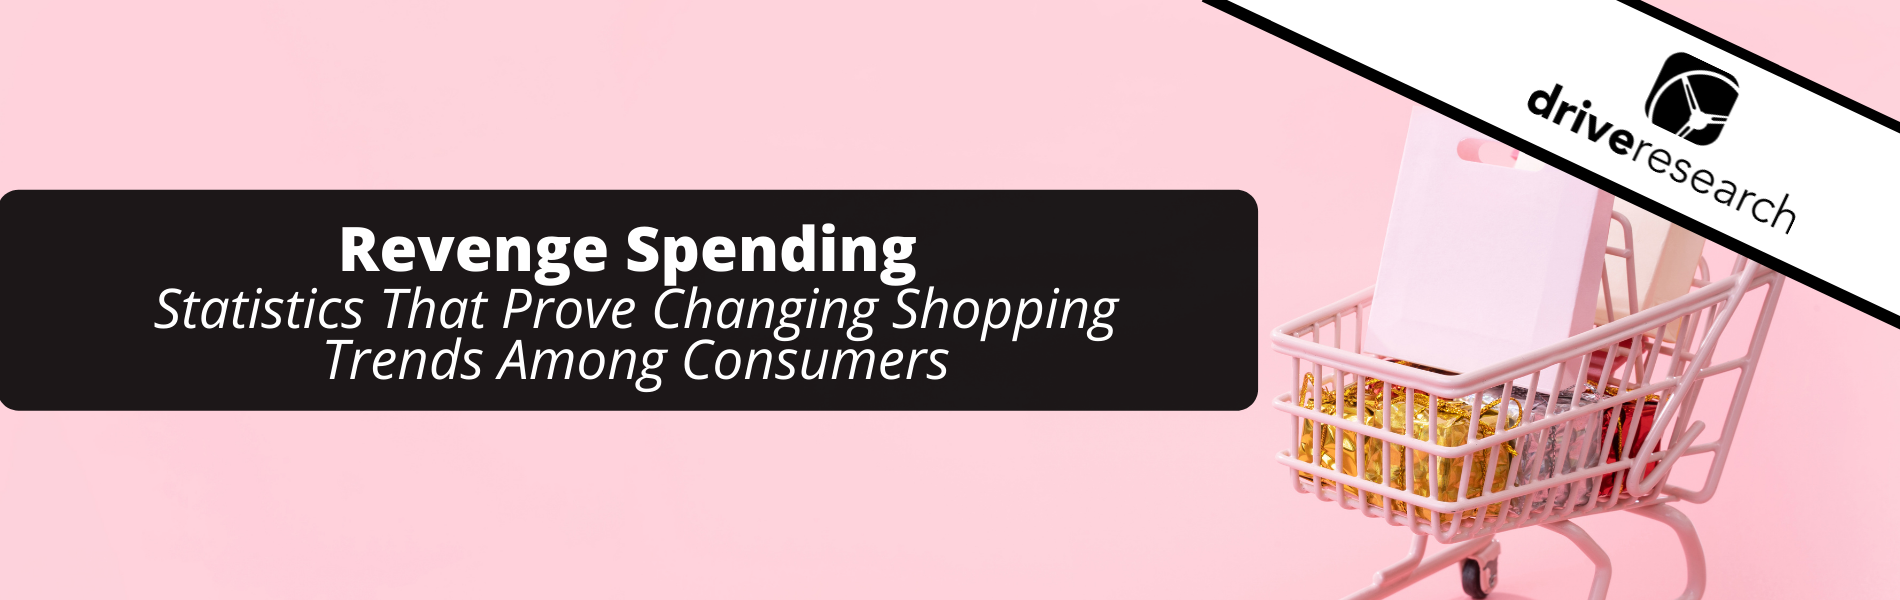 Revenge Spending: 7 Statistics That Prove Changing Shopping Trends Among Consumers